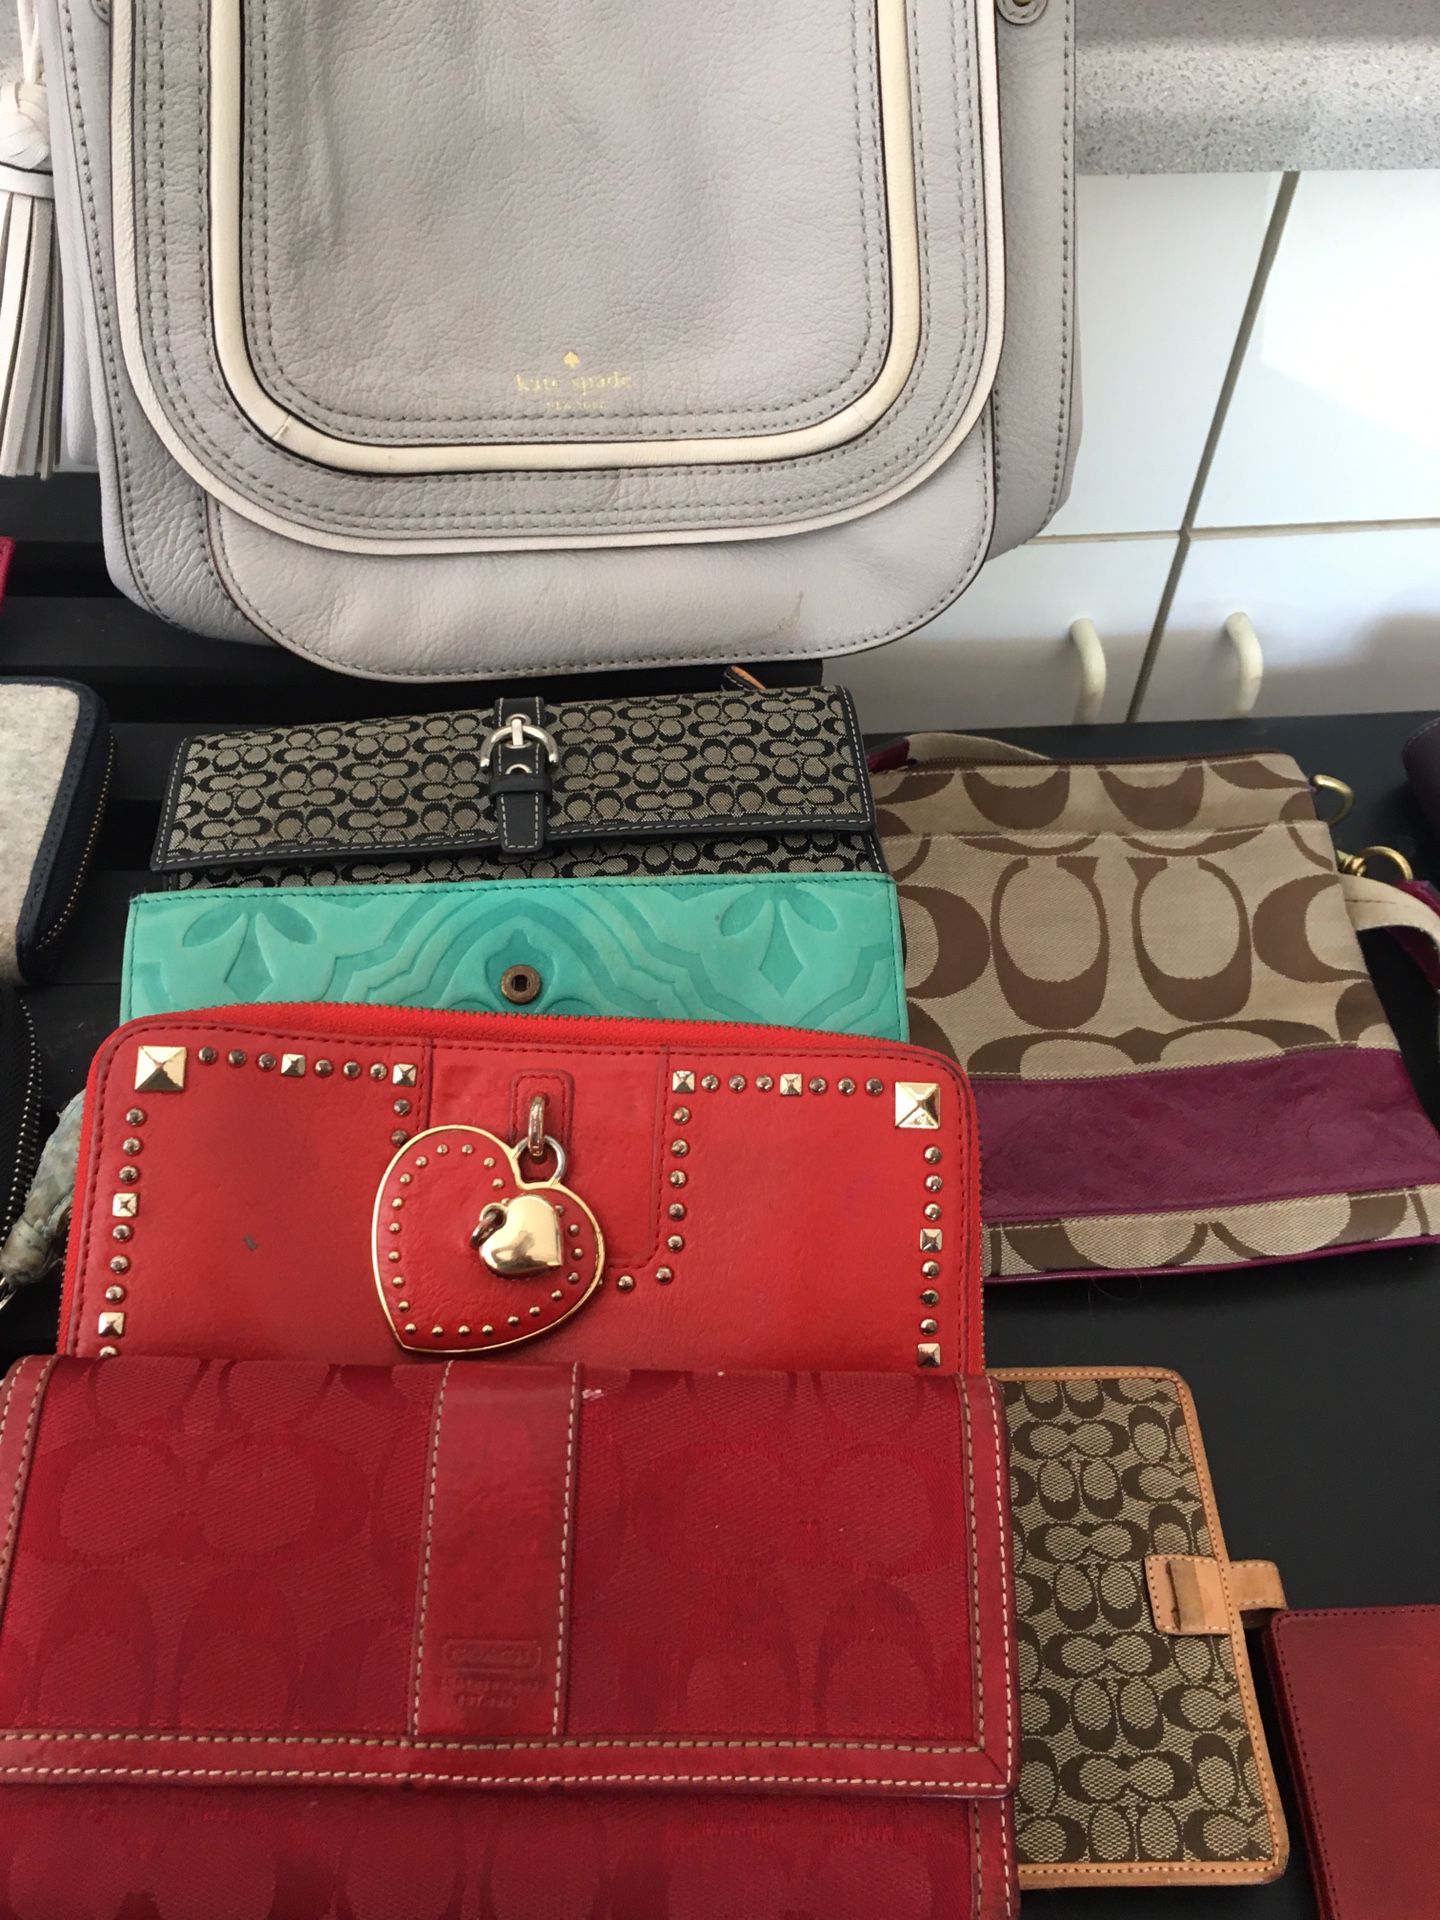 Coach, Kate Spade & Juicy Couture $60 for all